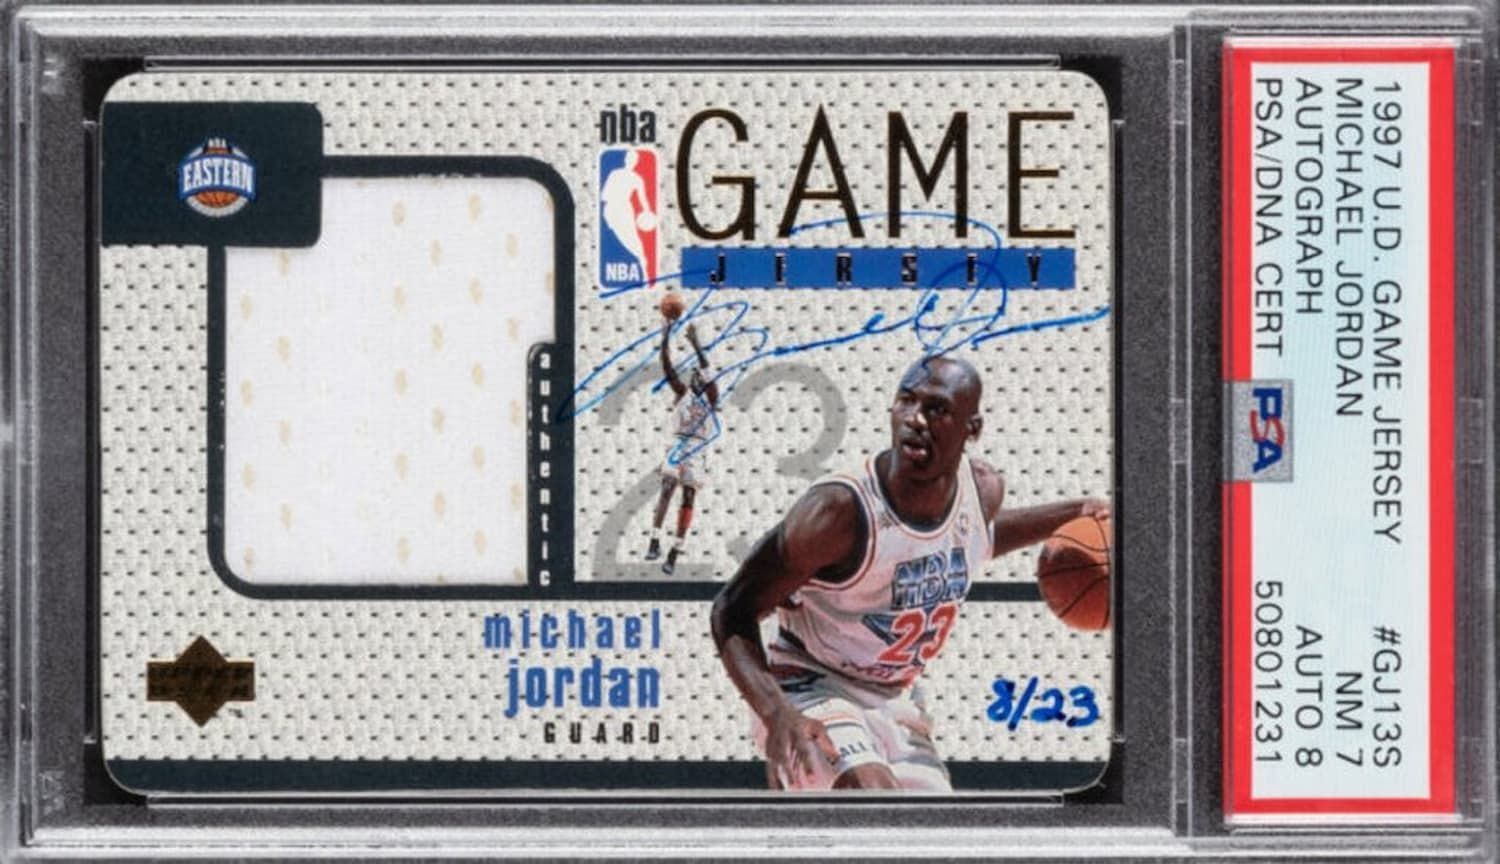 This signed basketball card was sold for $1.44 million dollars at an auction